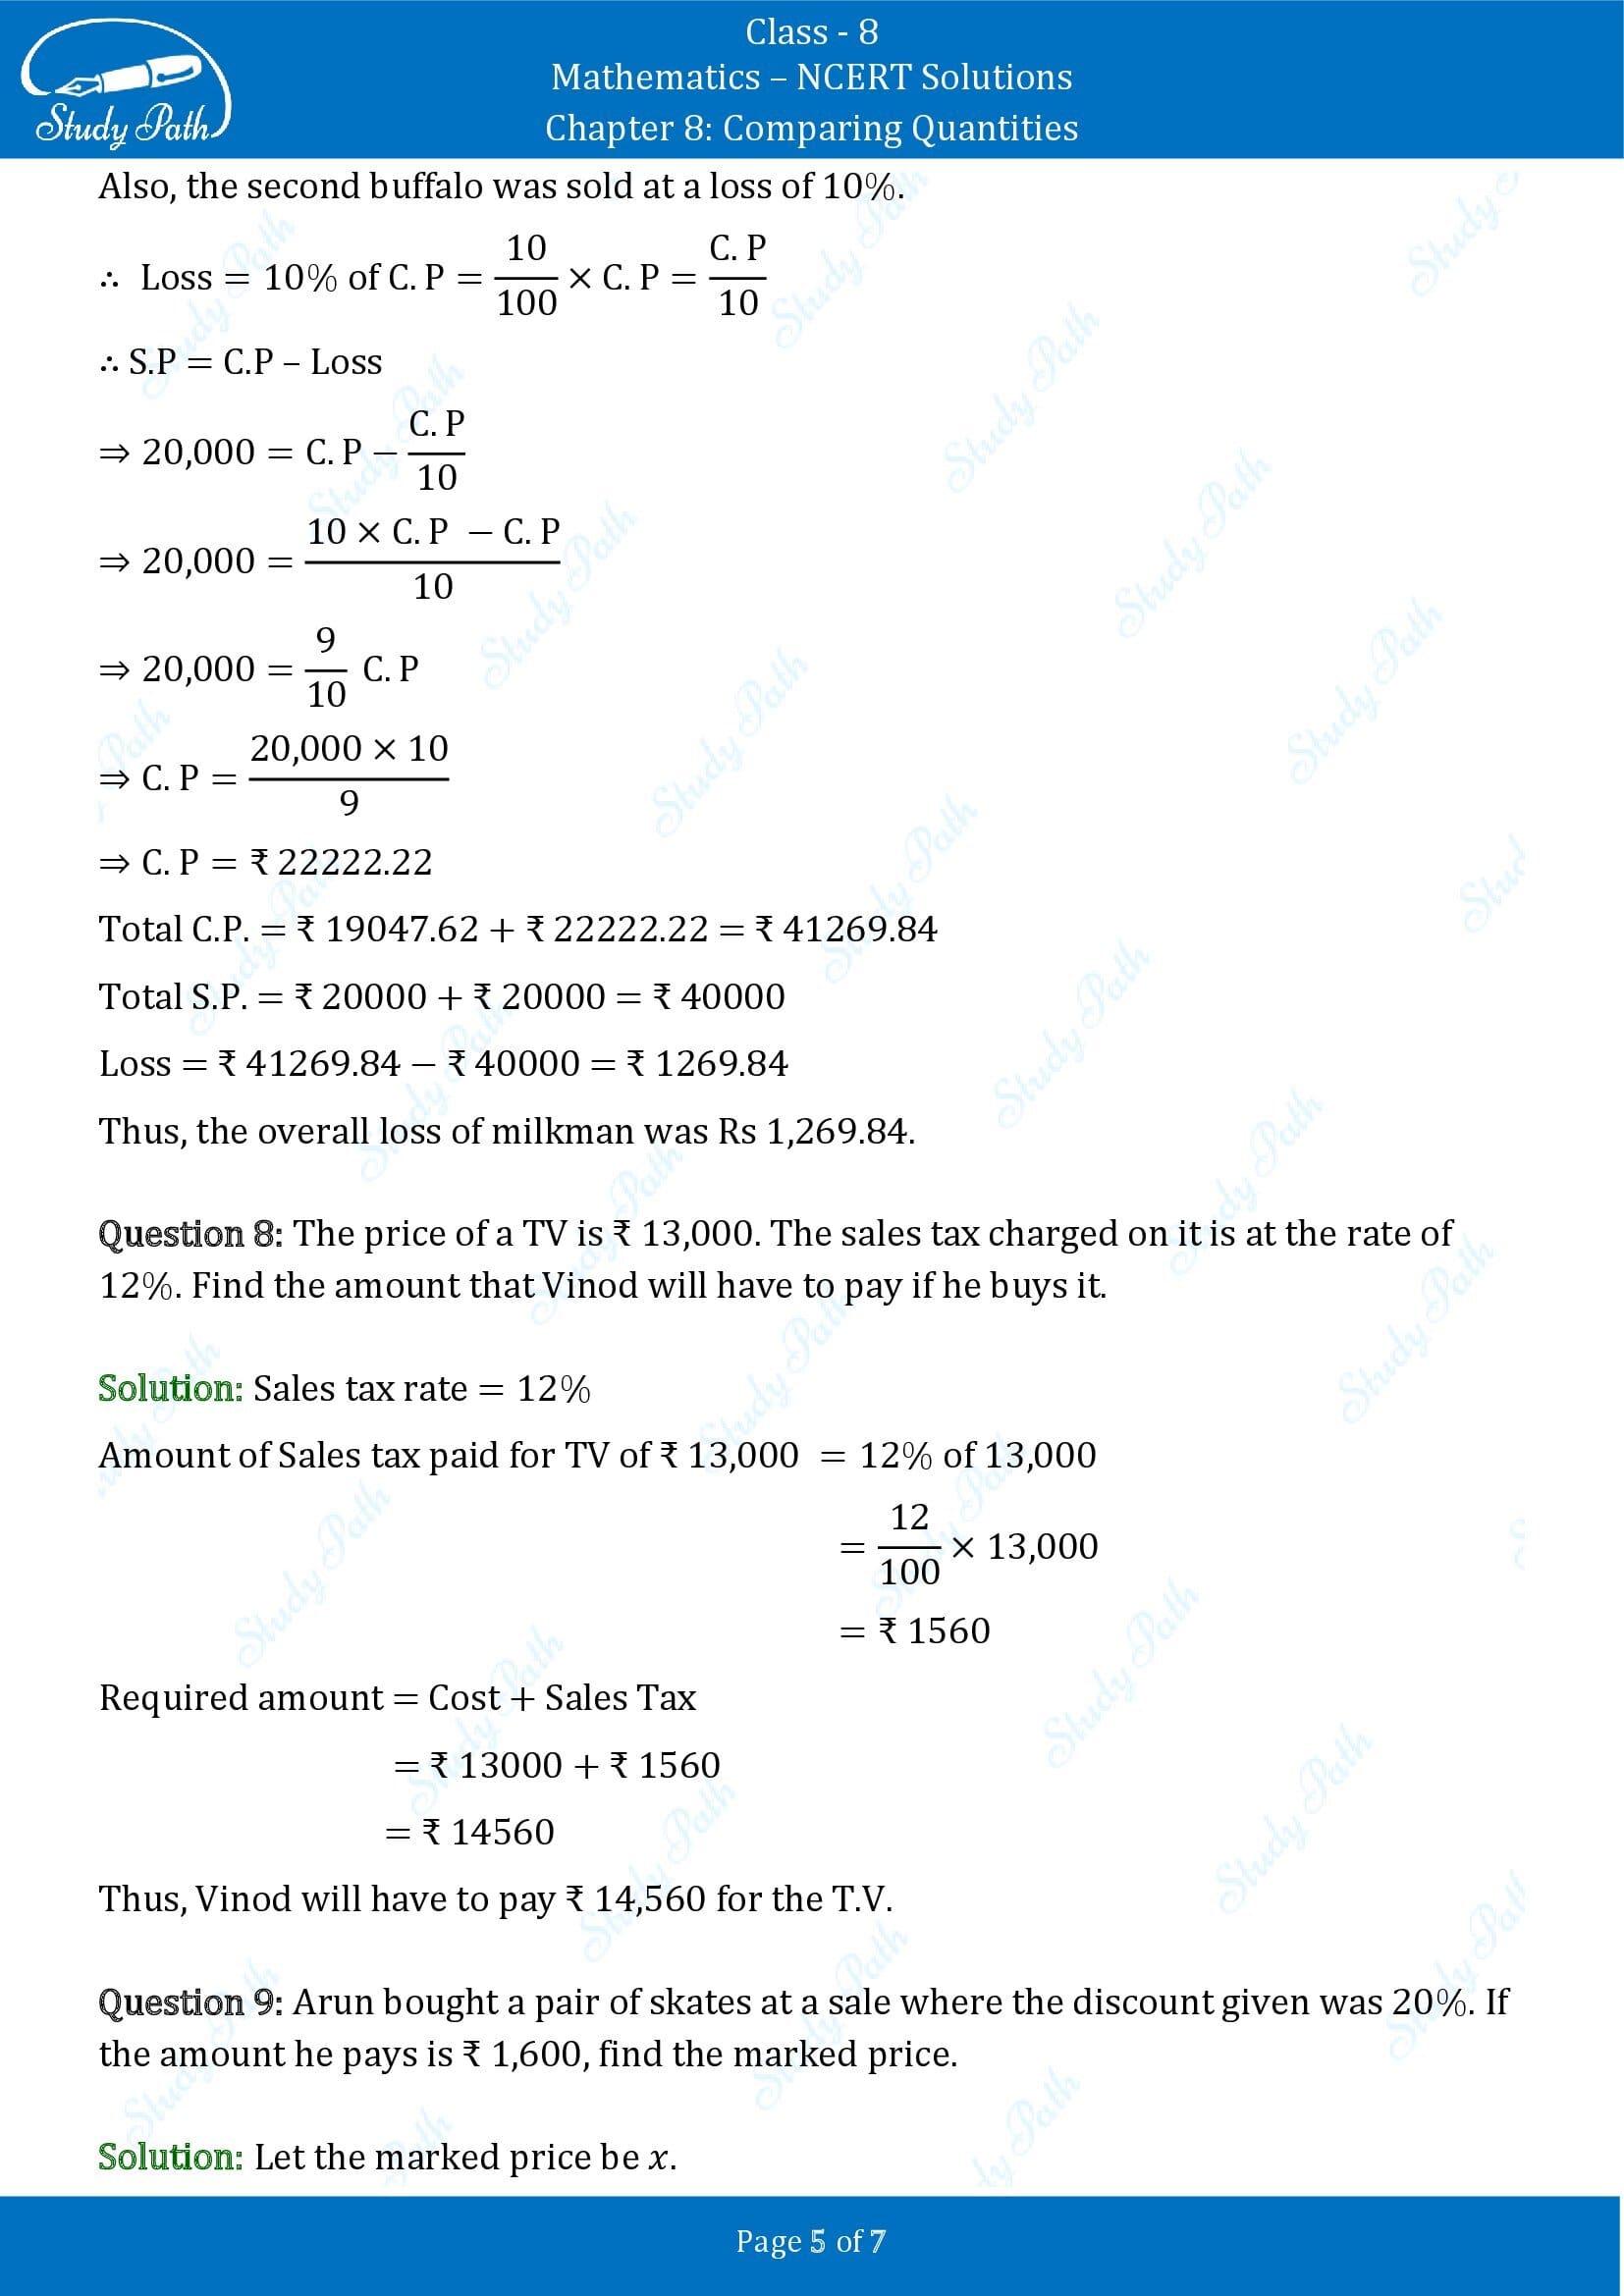 NCERT Solutions for Class 8 Maths Chapter 8 Comparing Quantities Exercise 8.2 00005